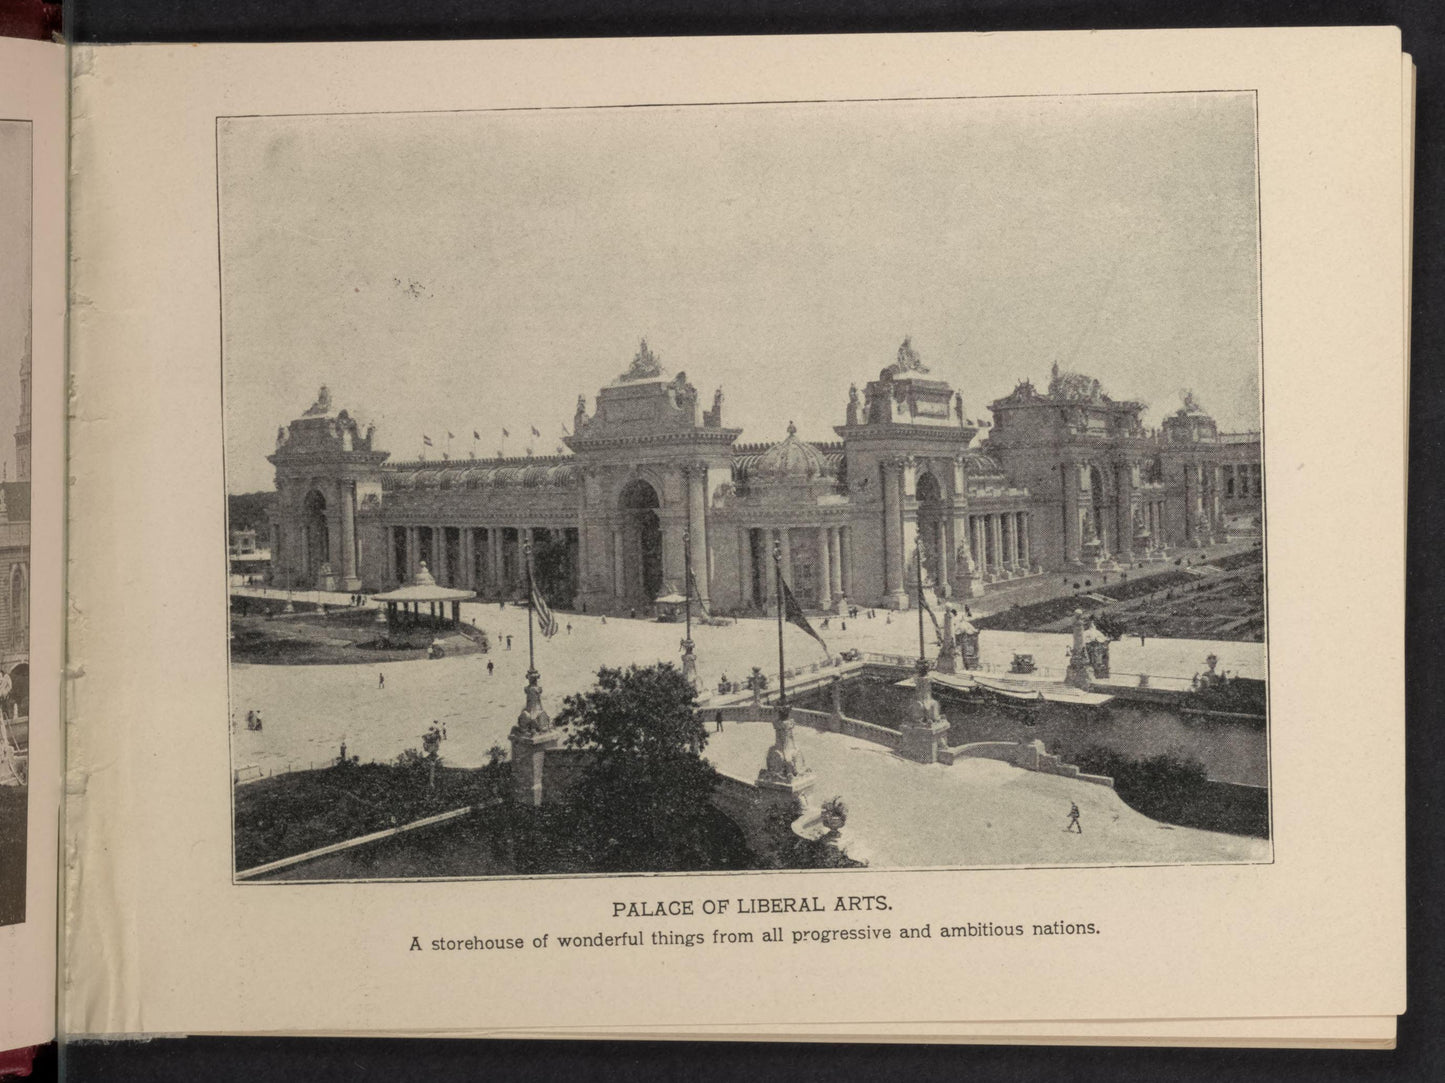 Louisiana Purchase Exposition 1904 - 3 Reprints in 1